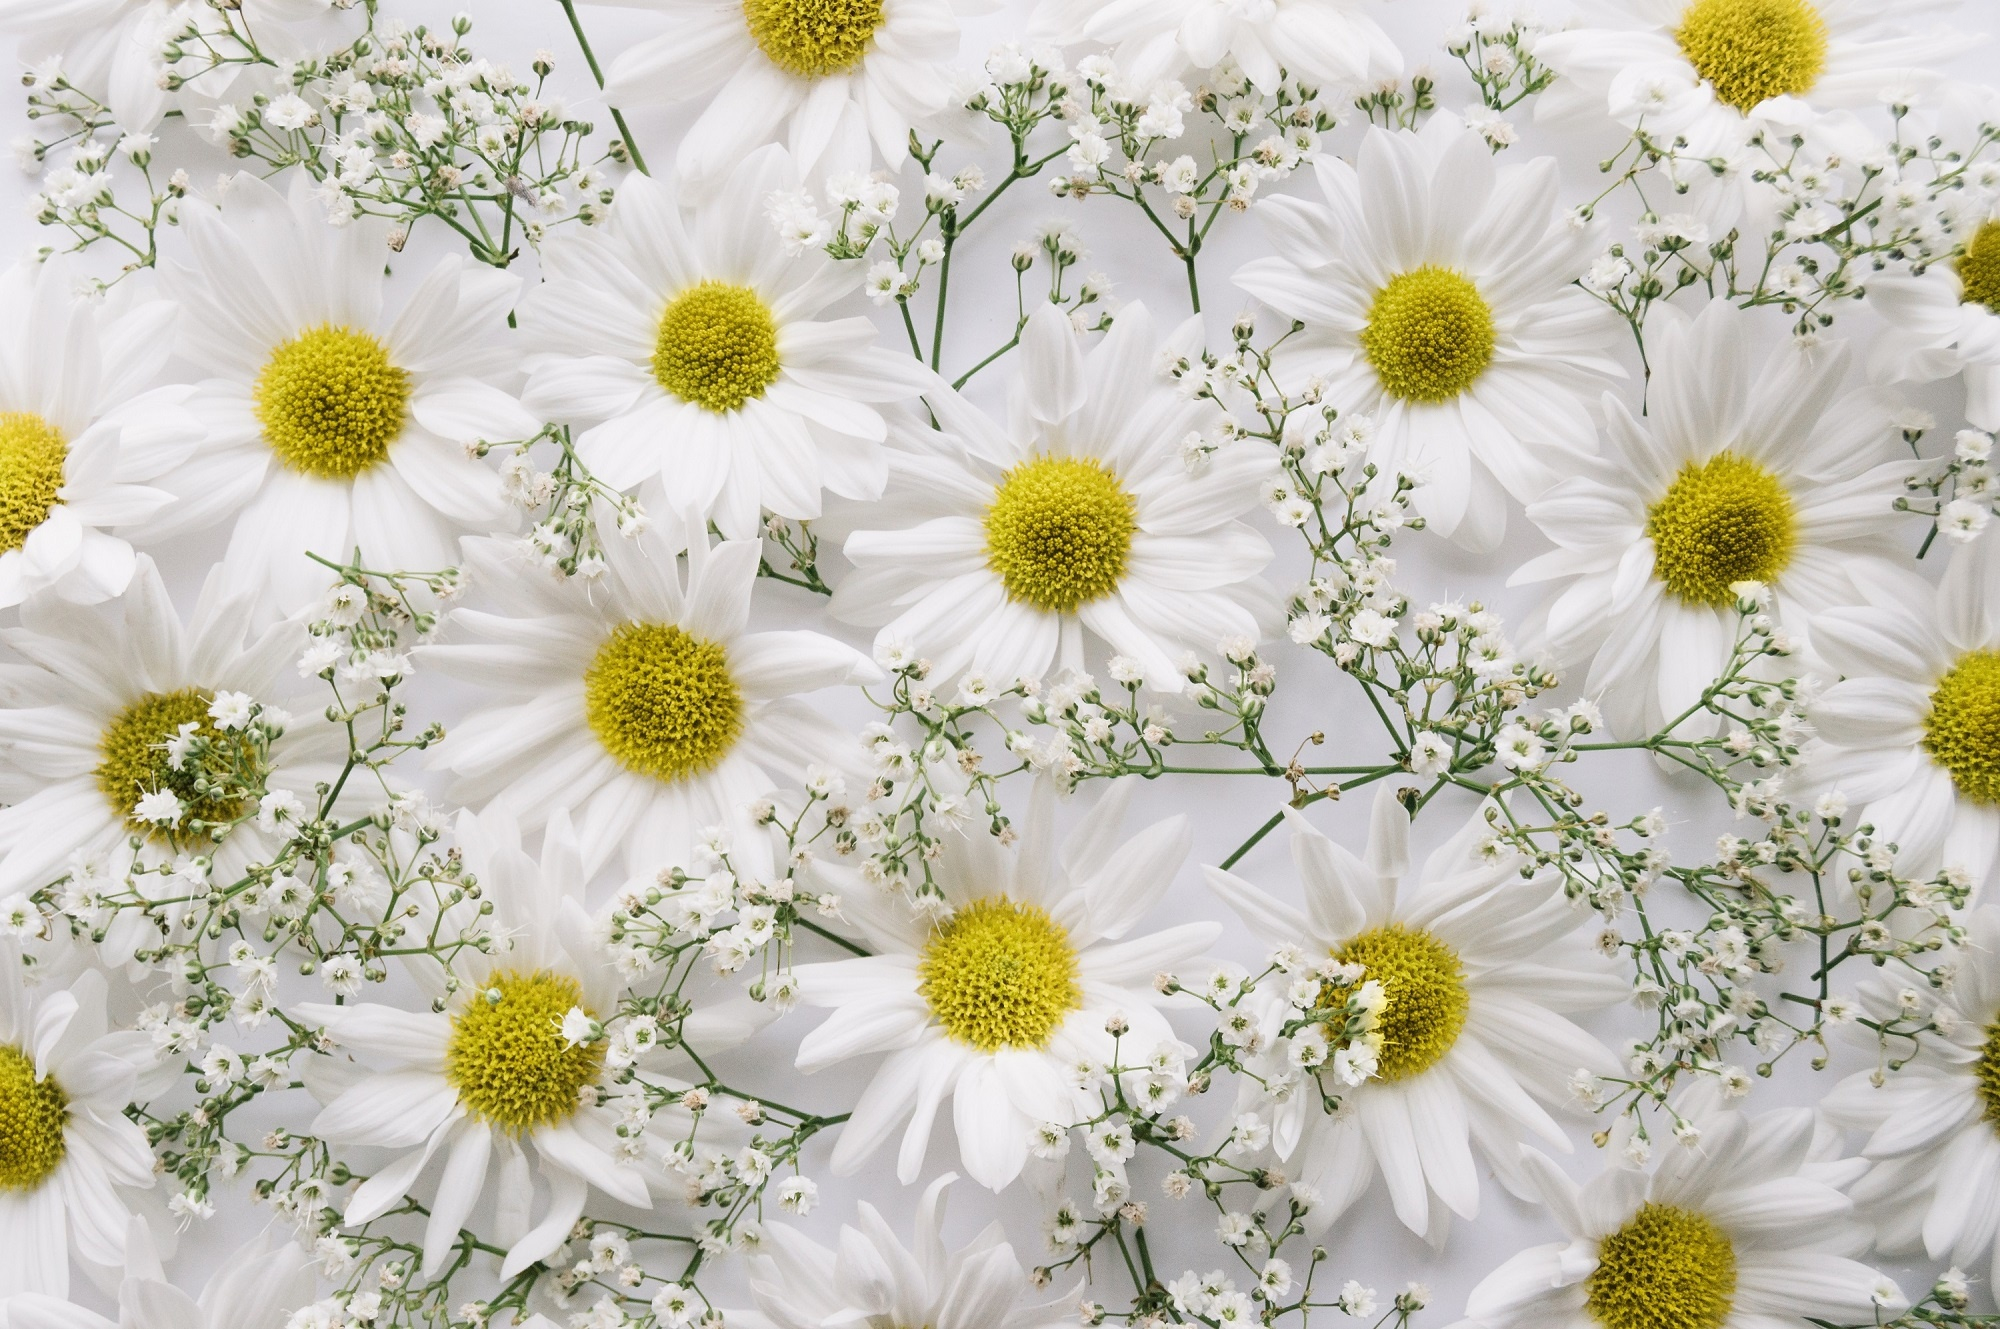 White Chrysanthemums and Baby's Breath